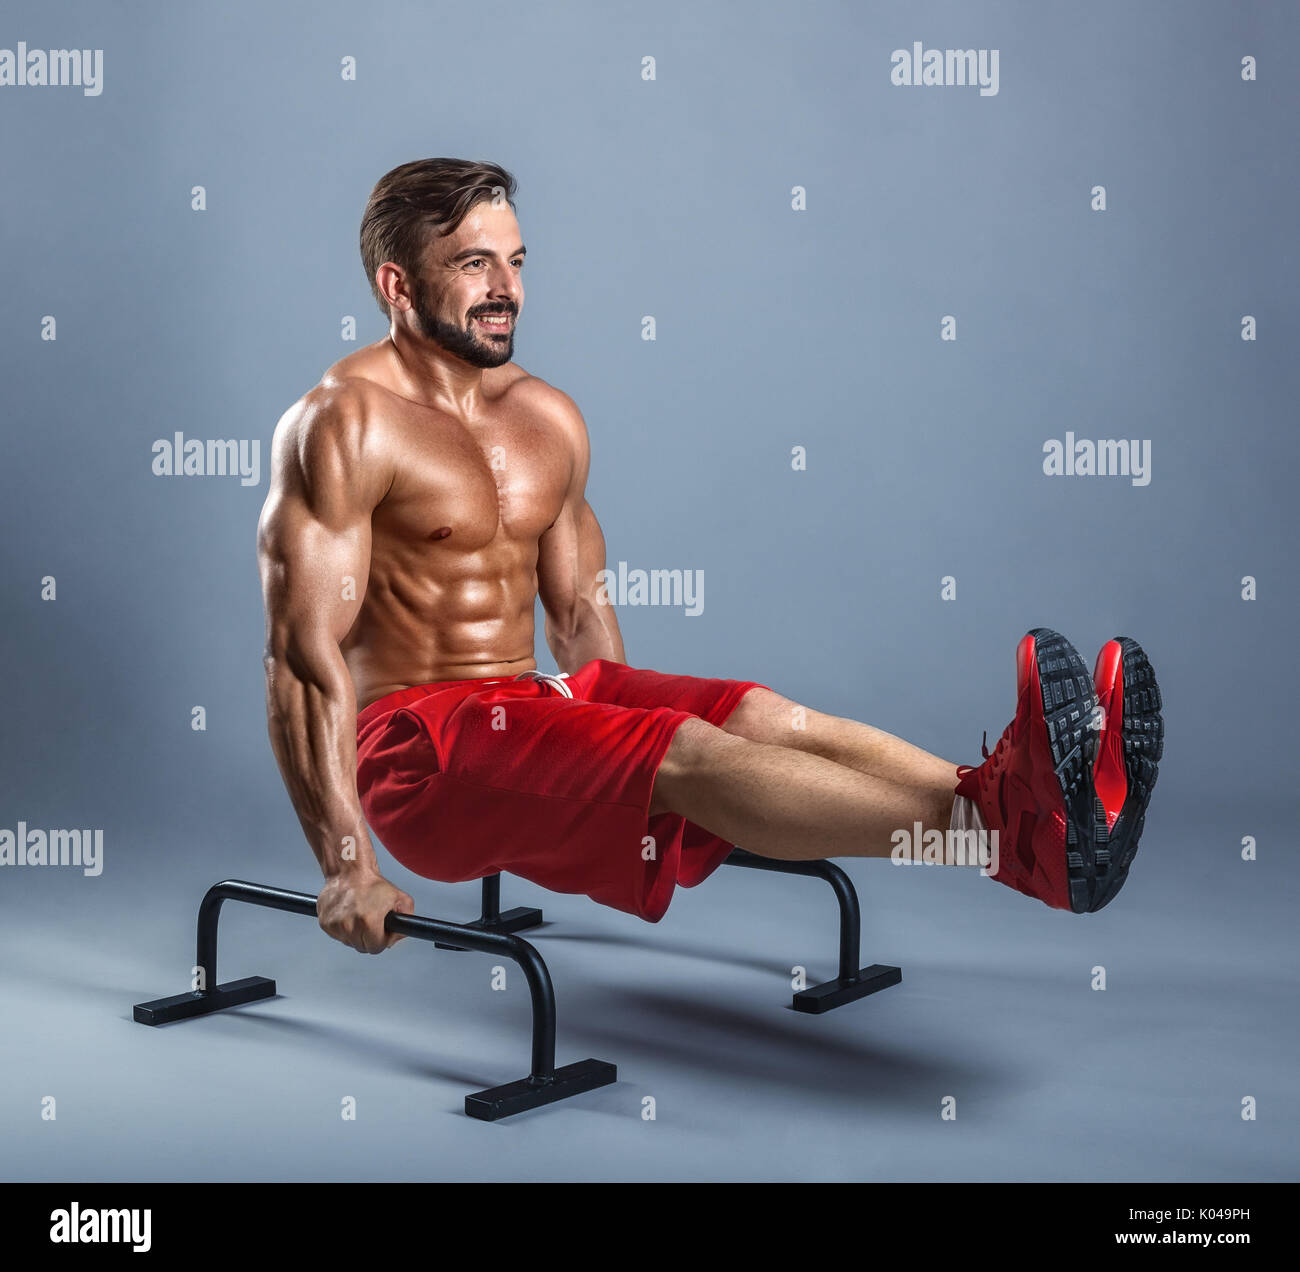 Handsome athlete working out exercise on parallel bars on a gray background Stock Photo